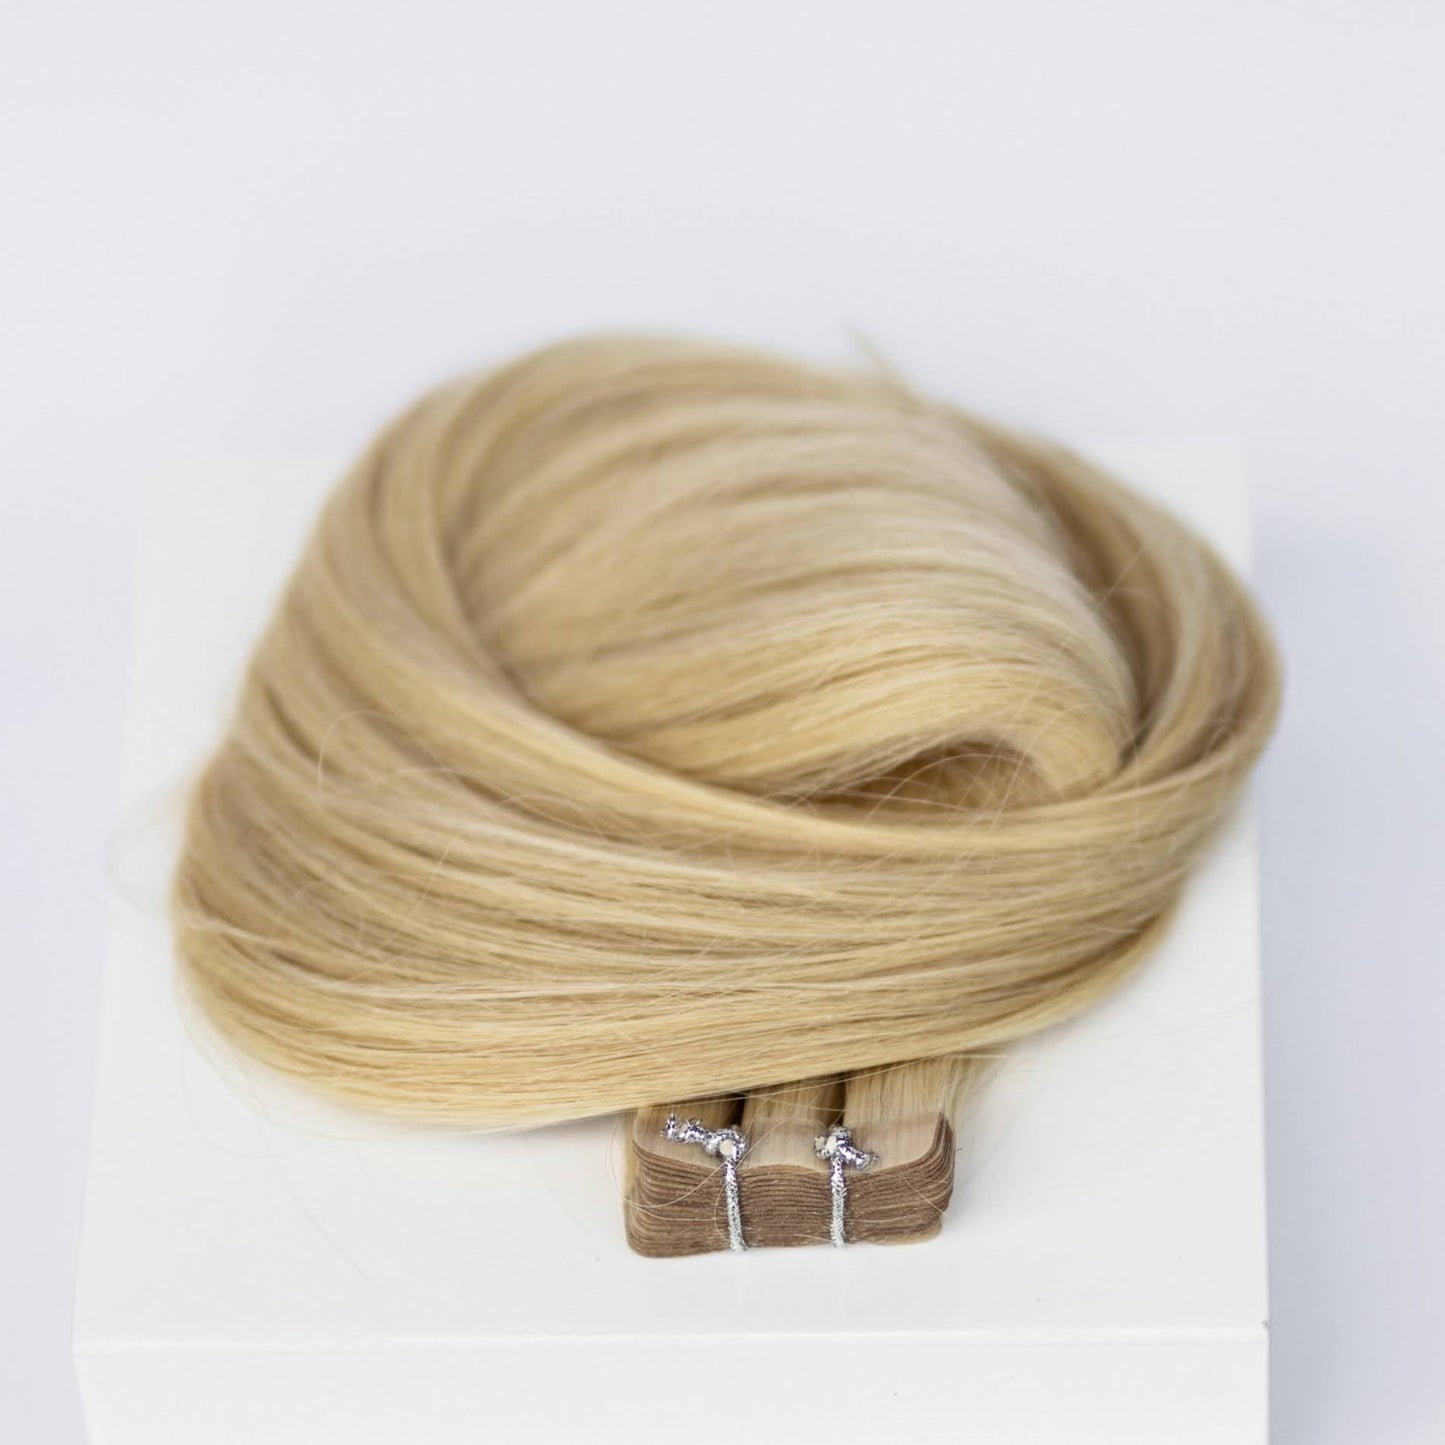 Tape-In 18" 50g Professional Hair Extensions - #22 Light Ash Blonde